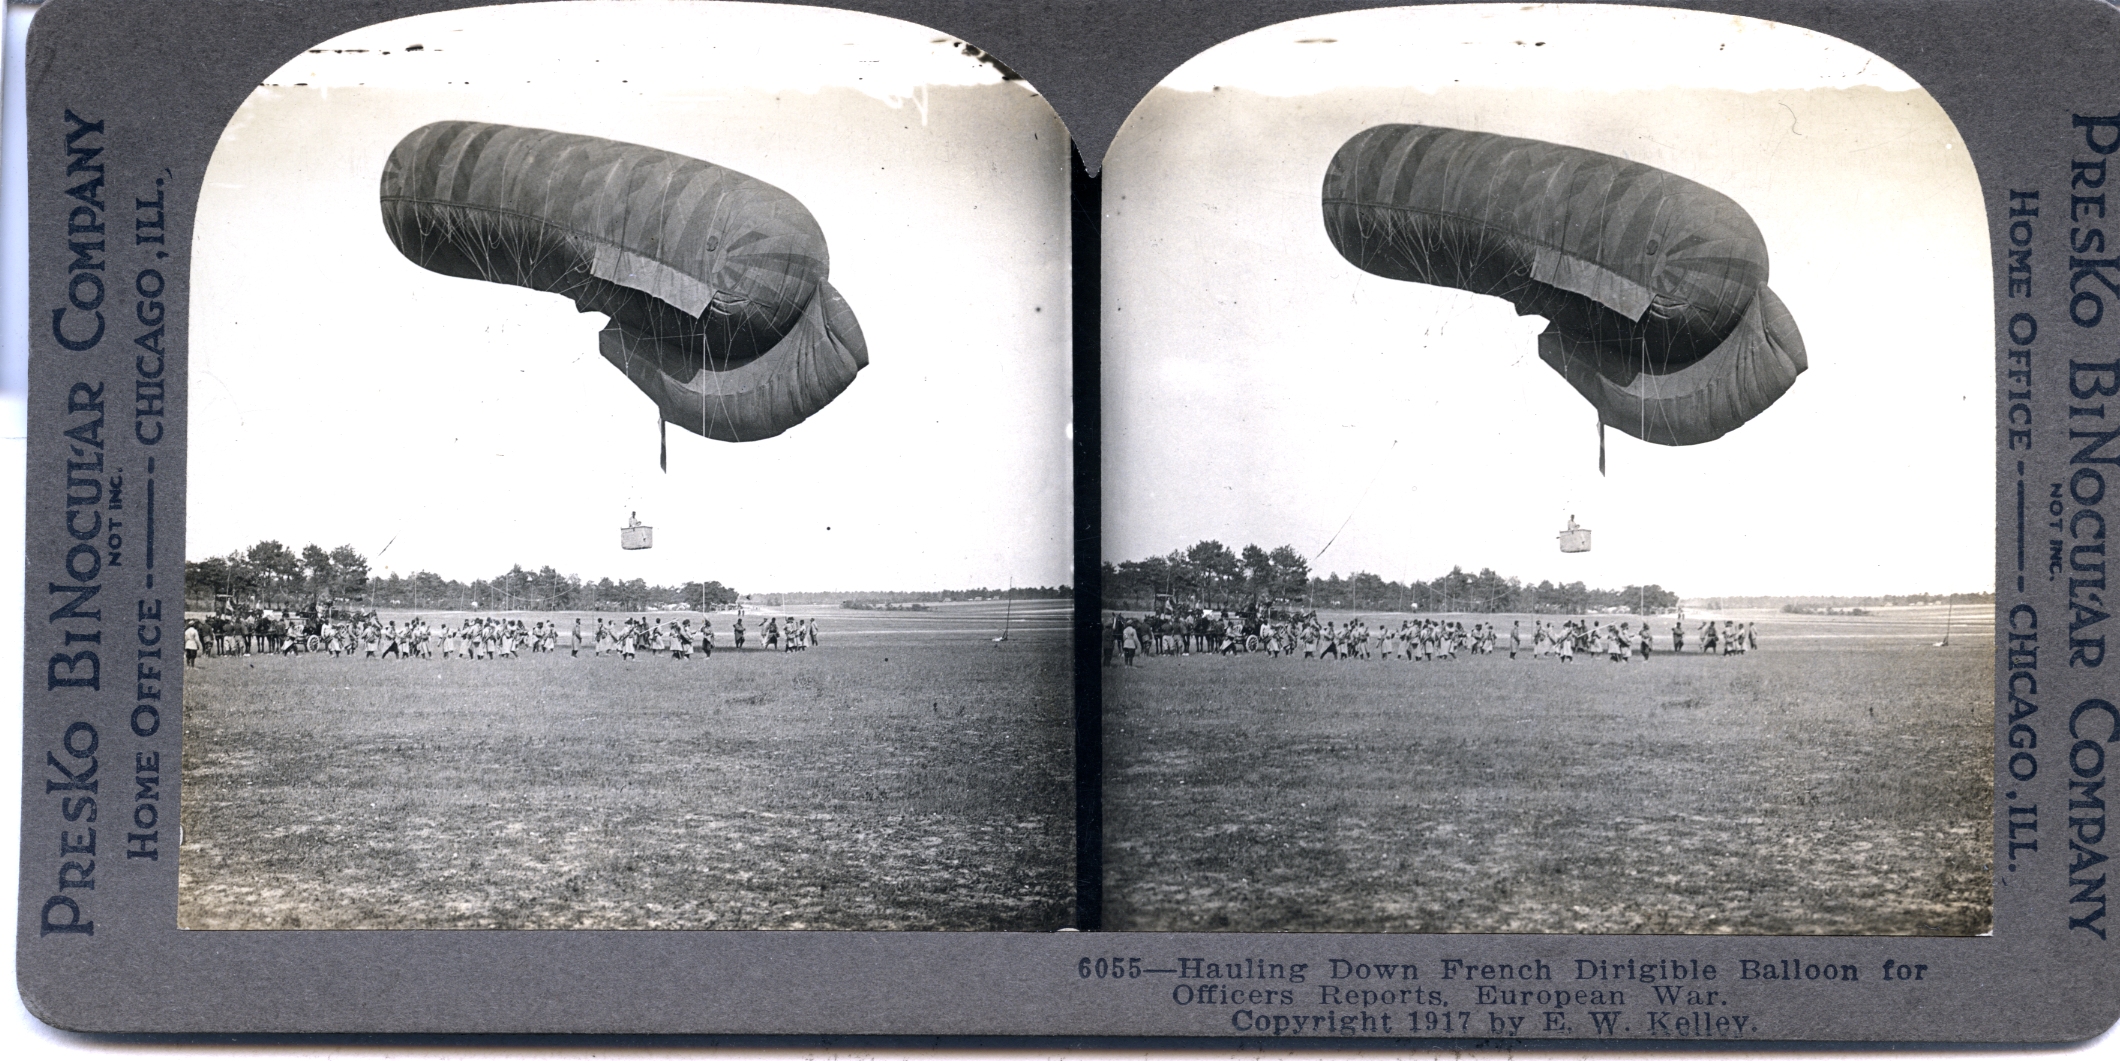 Hauling Down French Dirigible Balloon for Officers Reports. European War